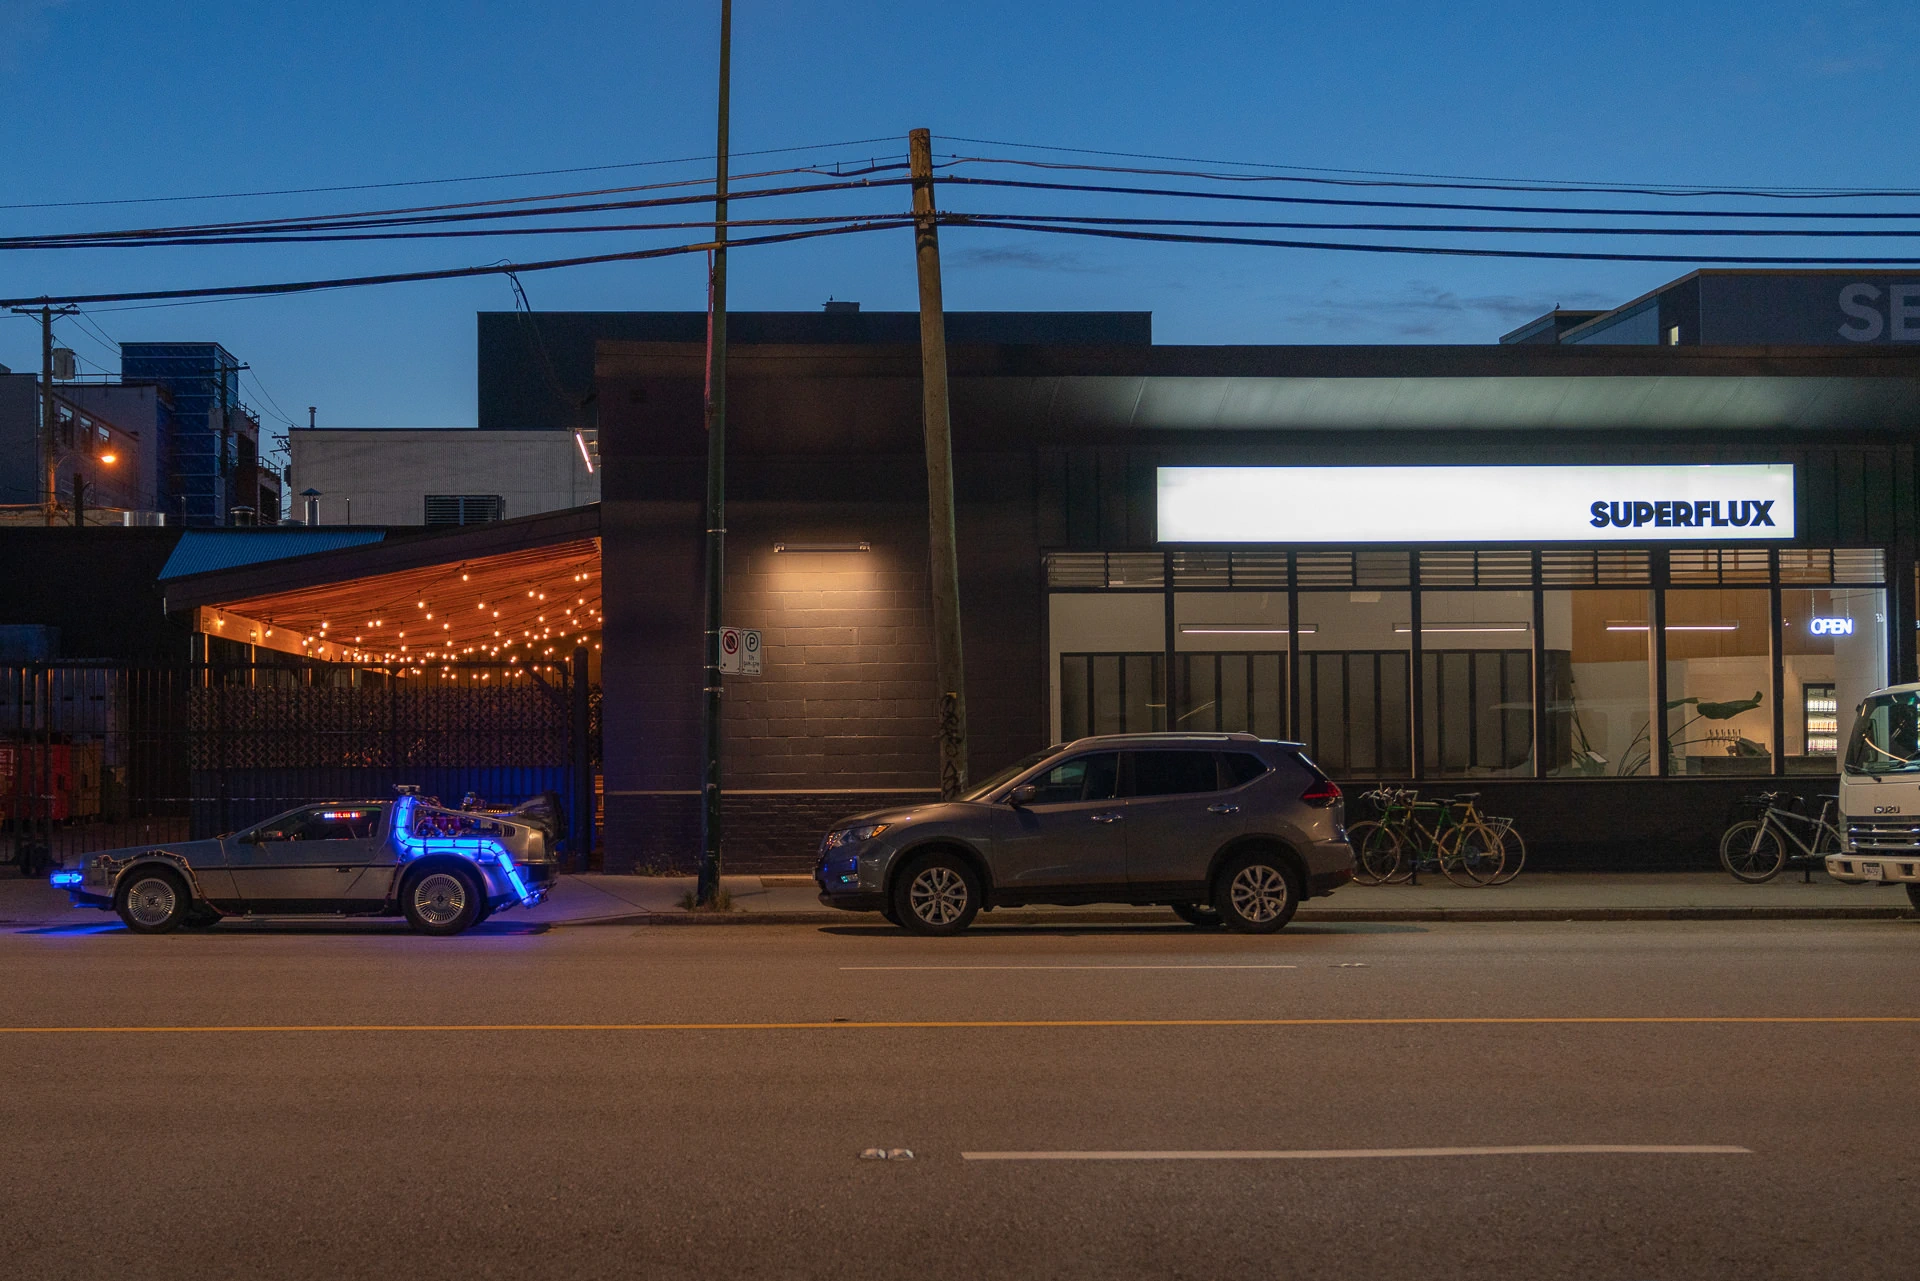 DeLorean 'Time Machine' replica with blue 'neon' flux bands parked at Superflux Beer, Vancouver, BC.